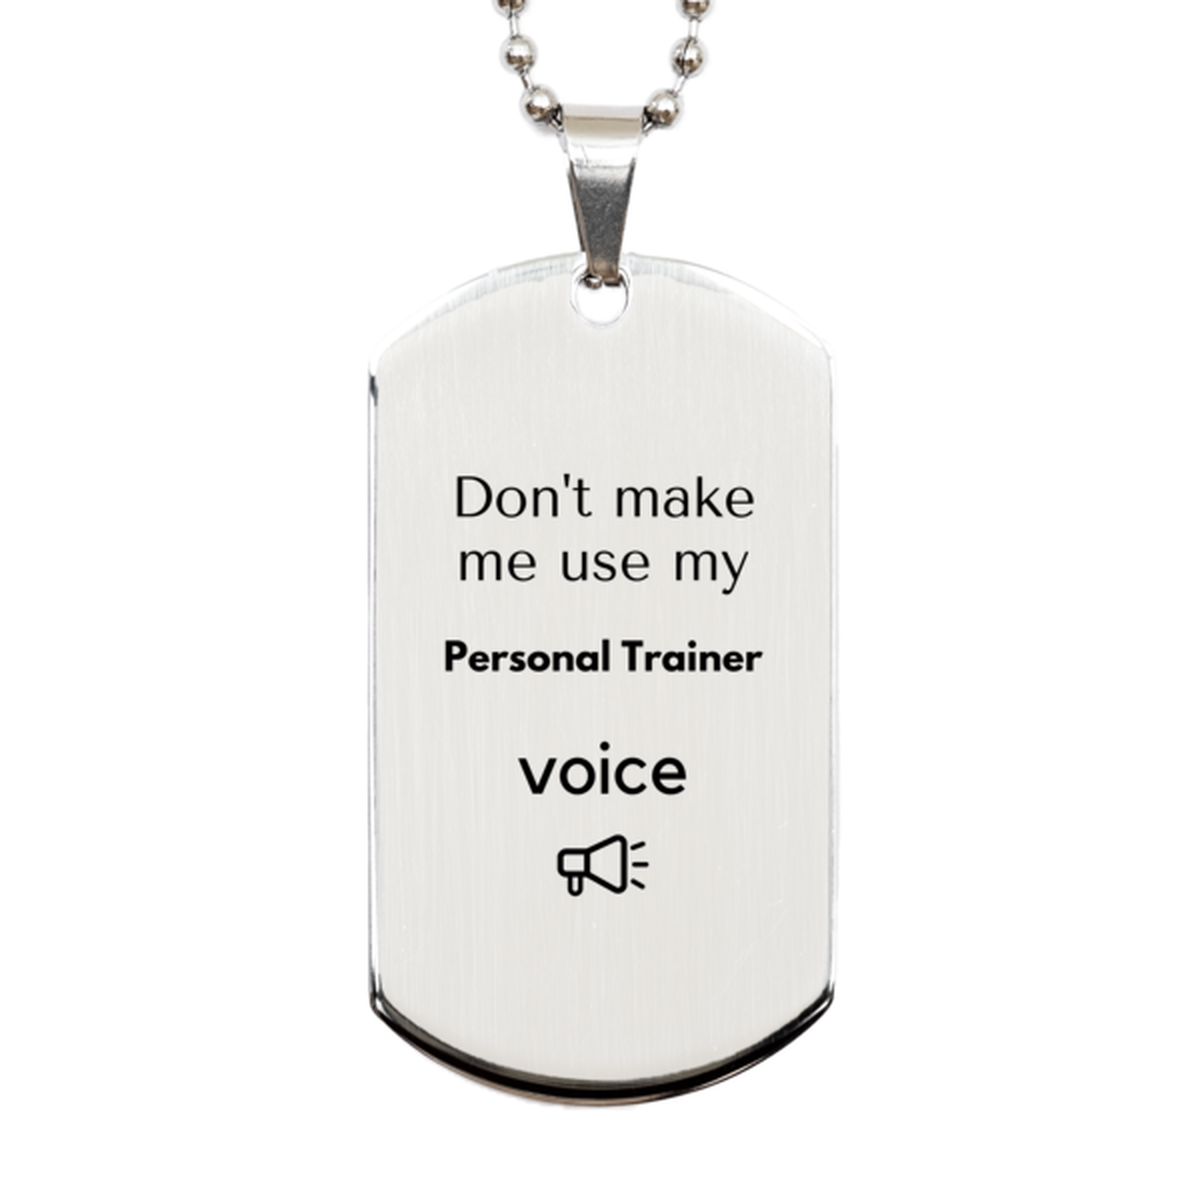 Don't make me use my Personal Trainer voice, Sarcasm Personal Trainer Gifts, Christmas Personal Trainer Silver Dog Tag Birthday Unique Gifts For Personal Trainer Coworkers, Men, Women, Colleague, Friends